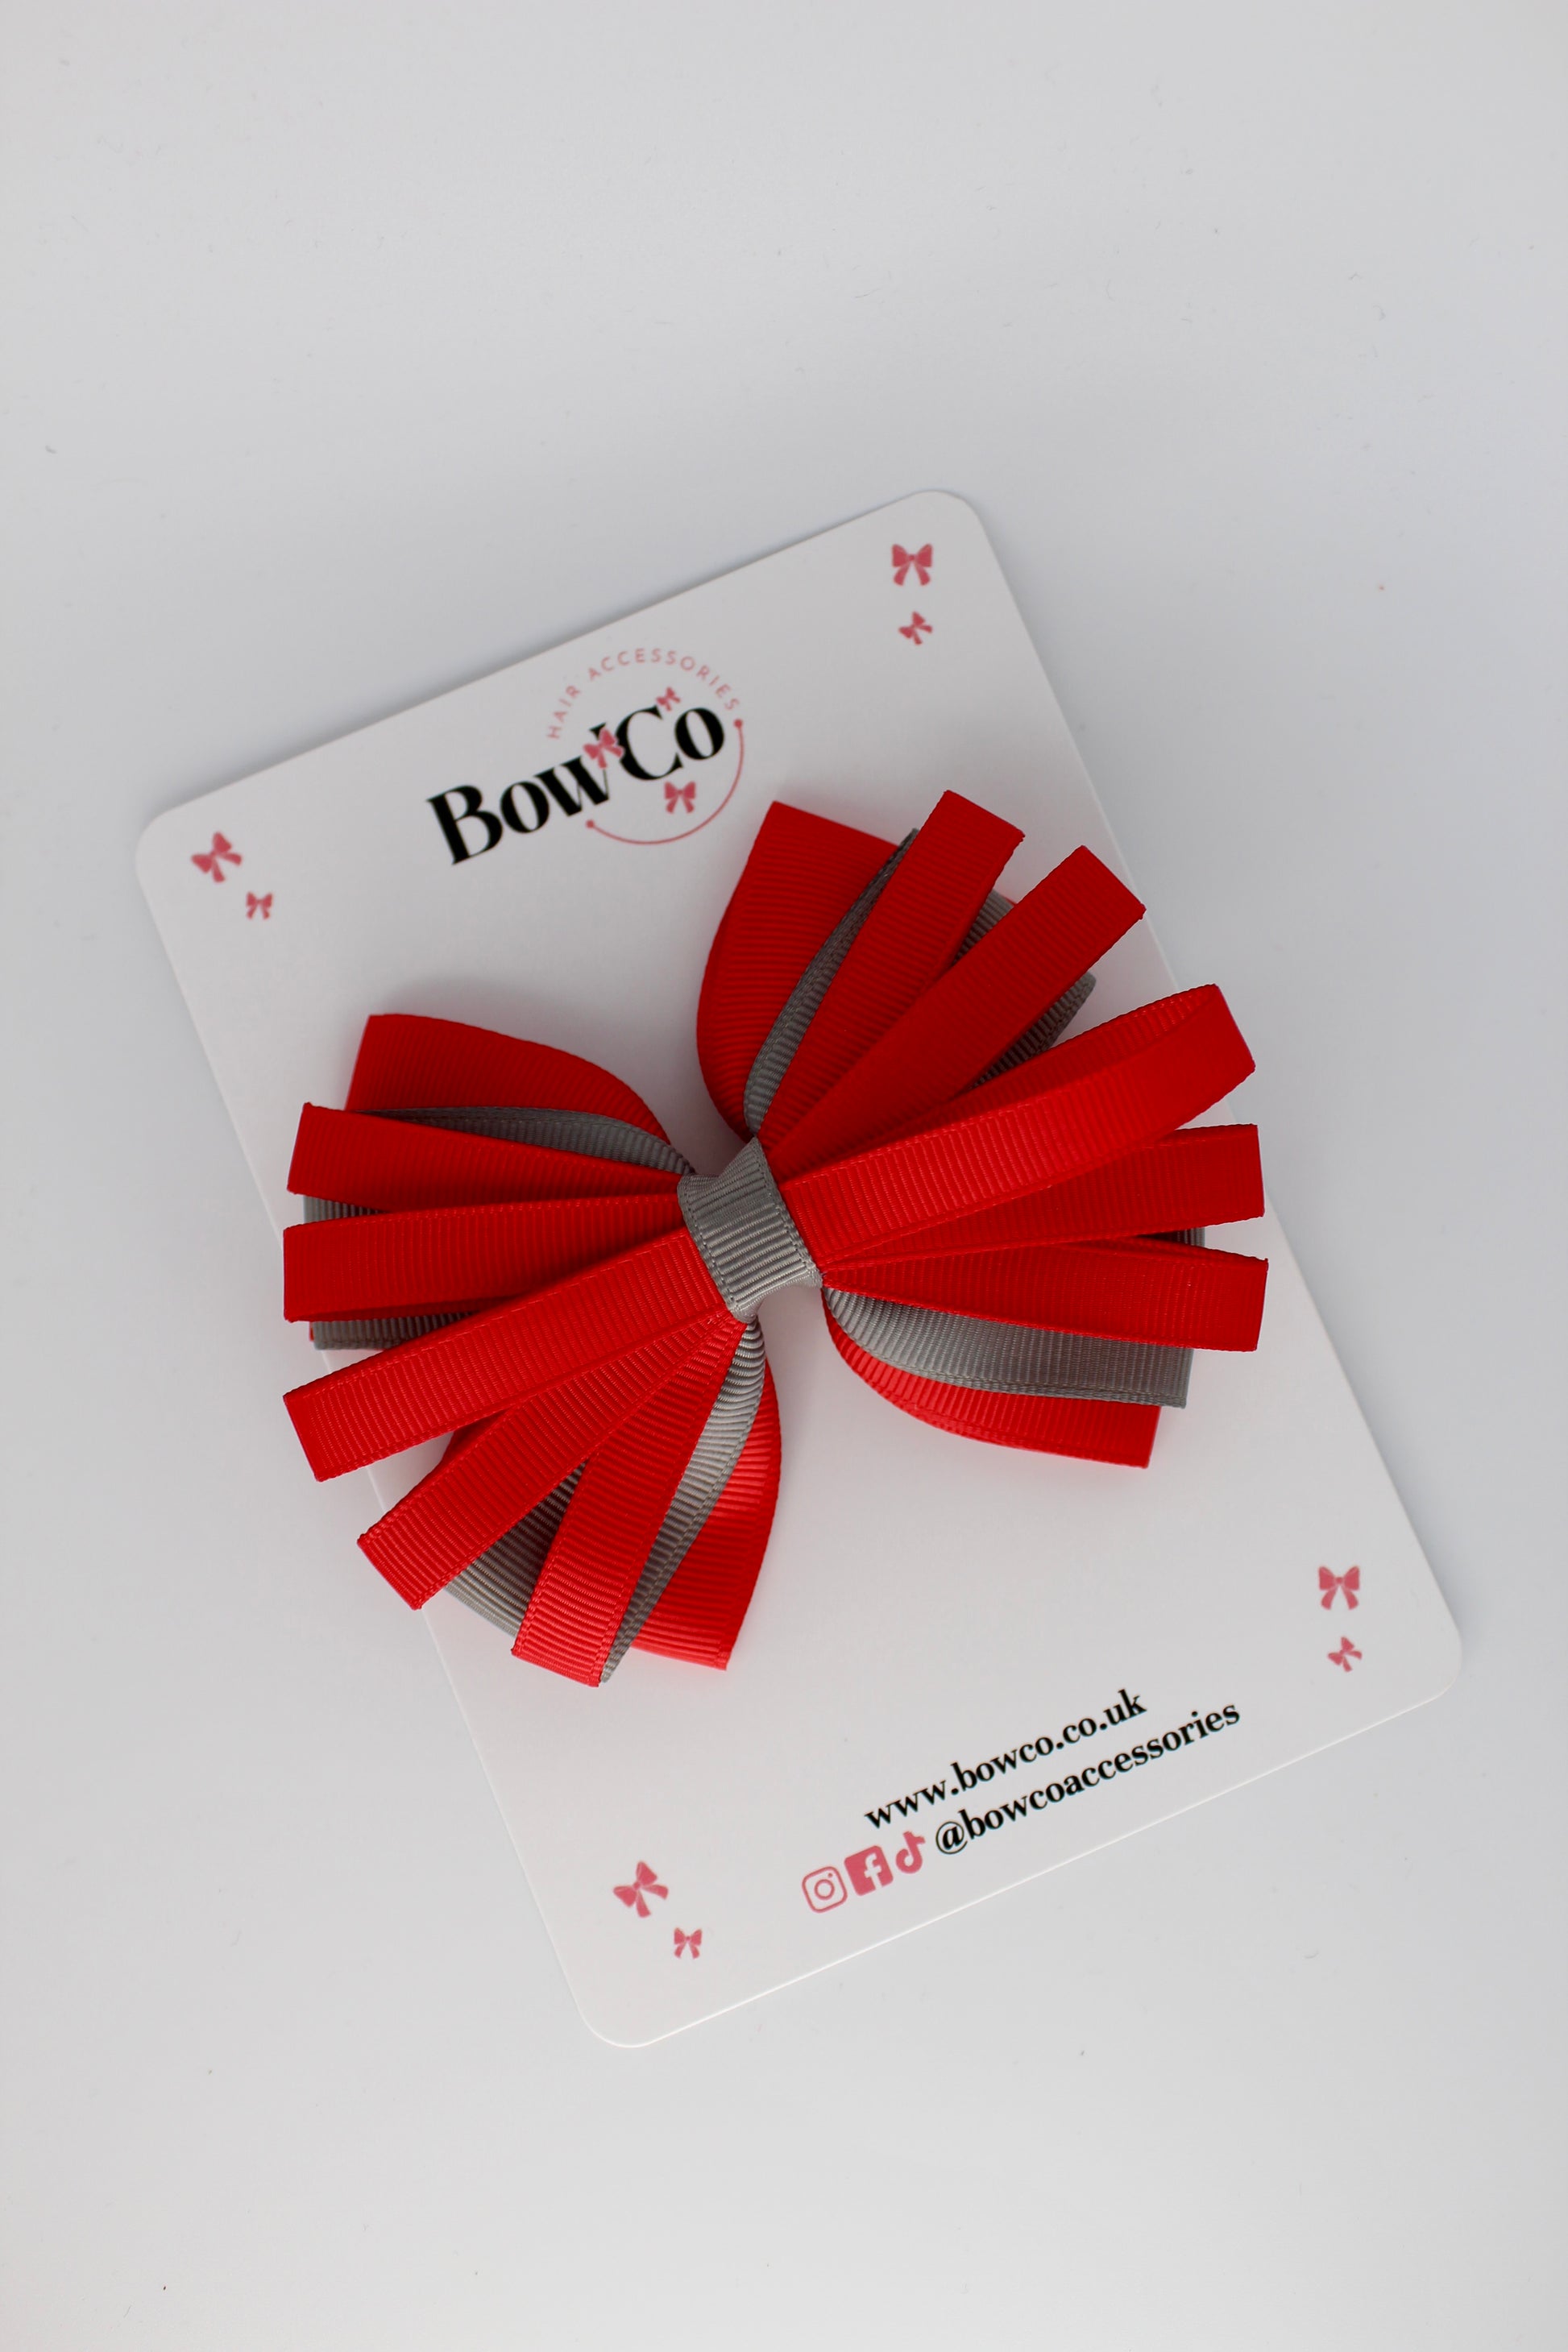 4 Inch Spiral Bow - 4 Inches - Clip - Red and Metal Grey